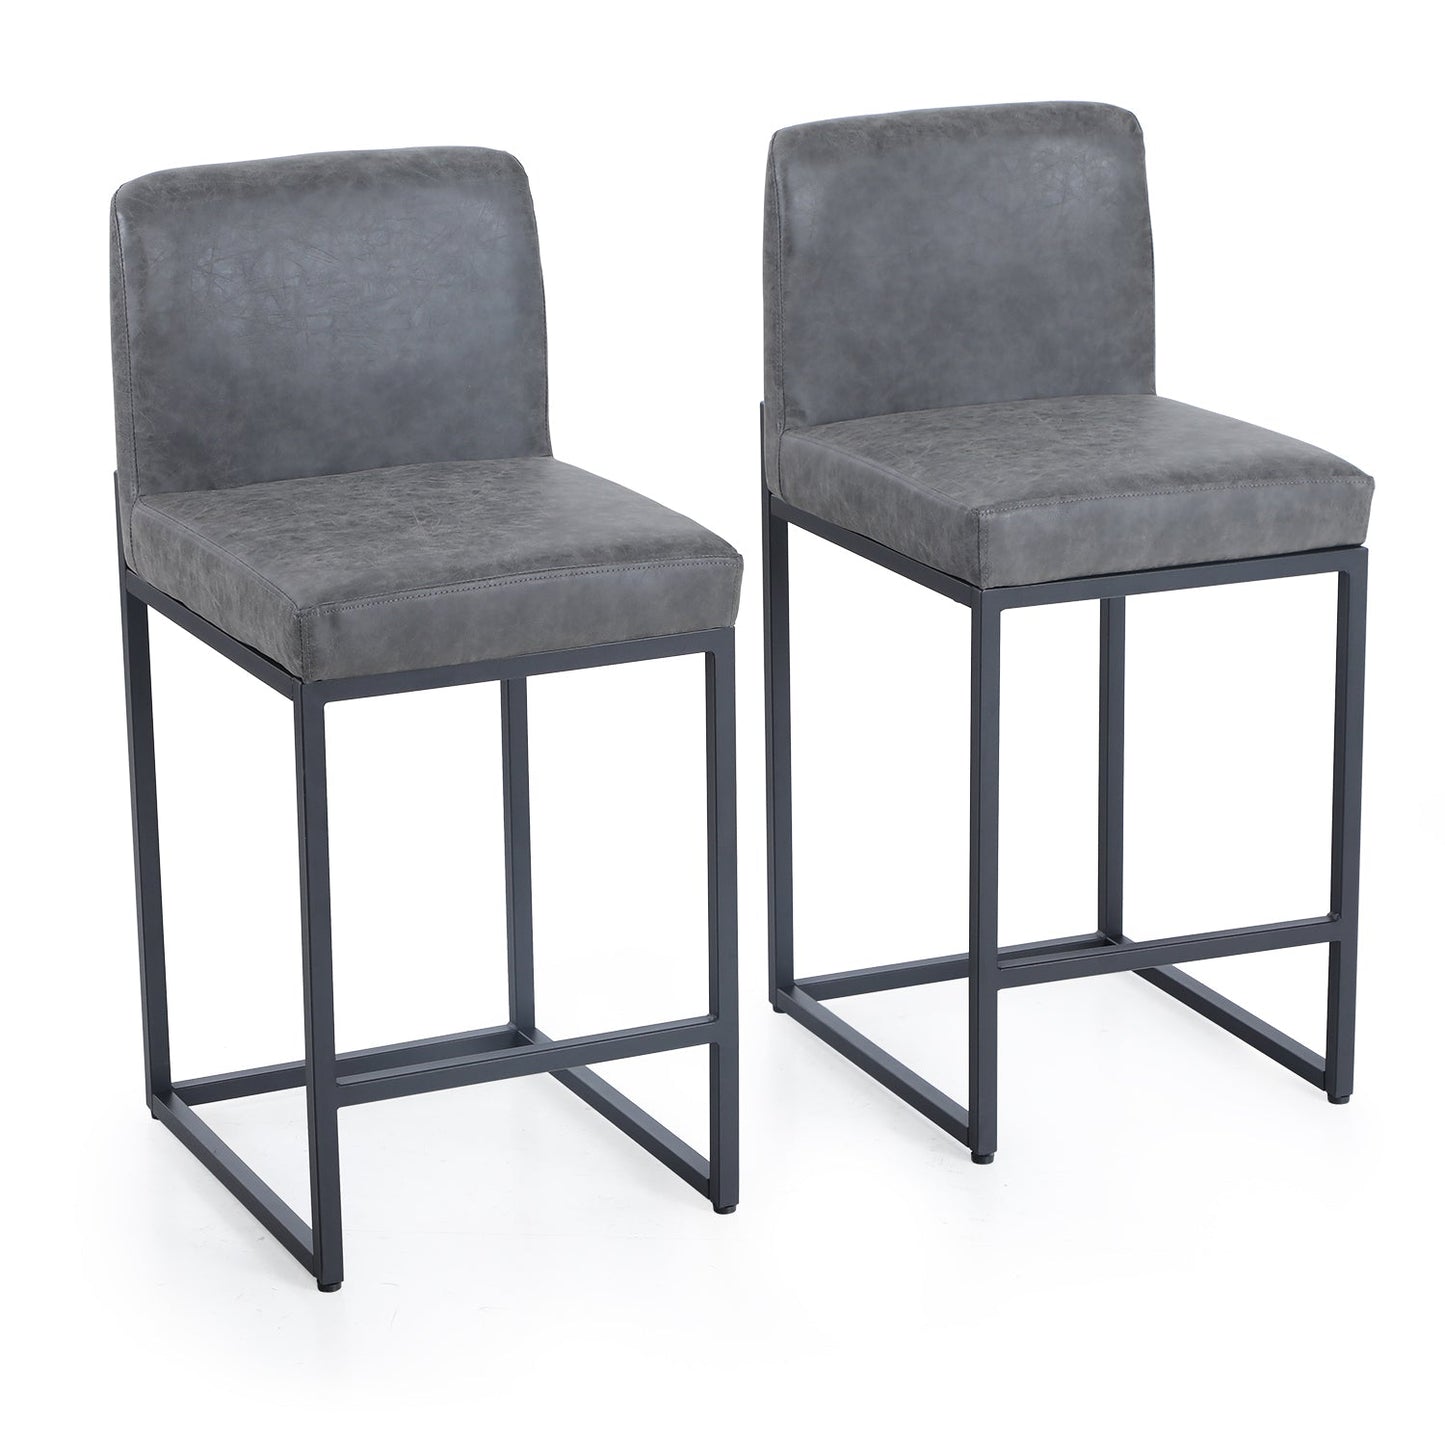 Sophia & William 24" PU Leather Counter Height Bar Stool with Backrest-Set of 2-Gray